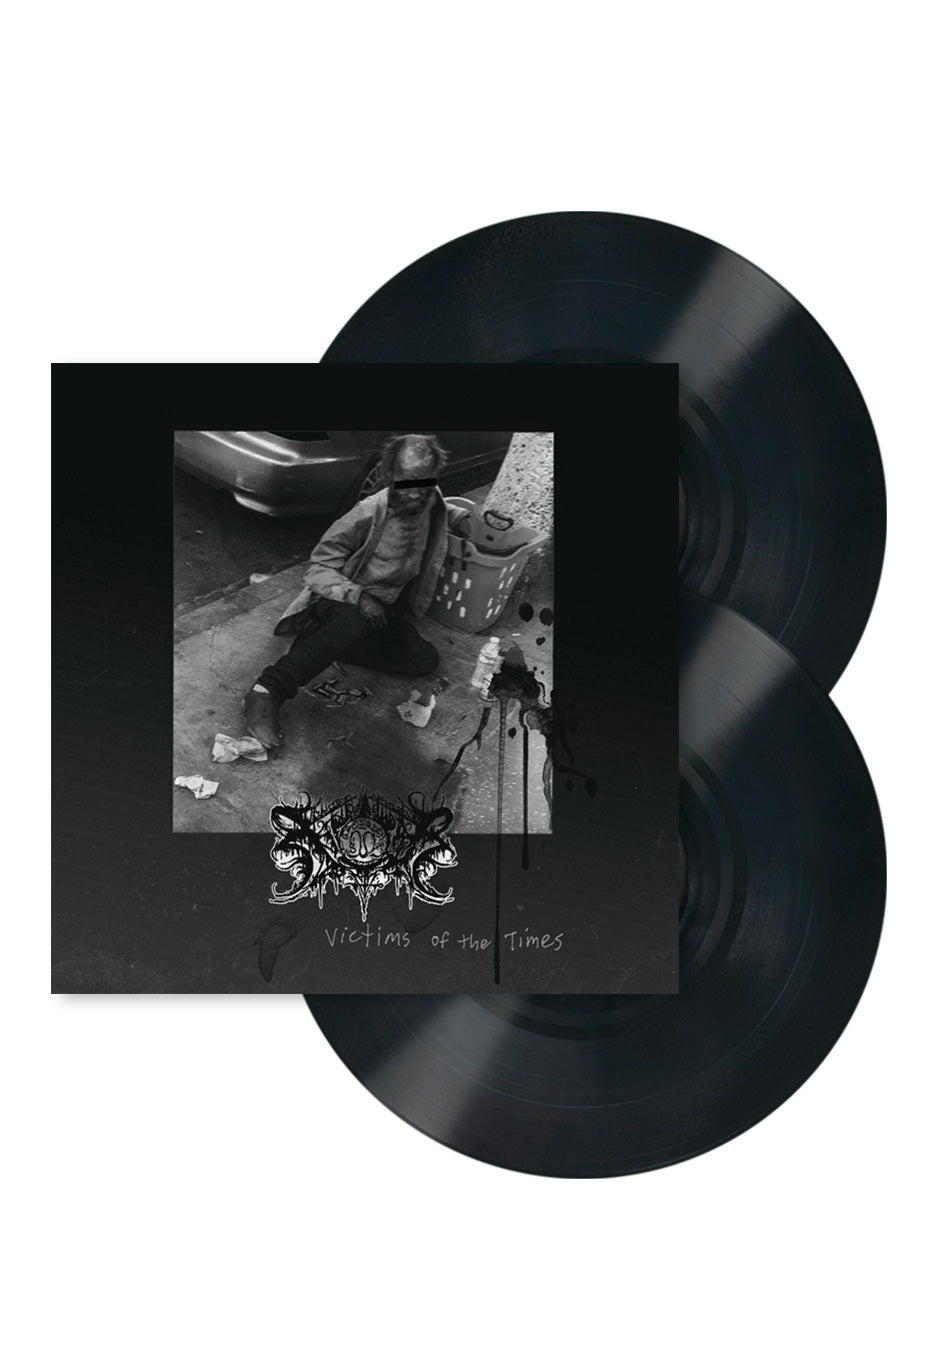 Xasthur - Victims Of The Times - 2 Vinyl